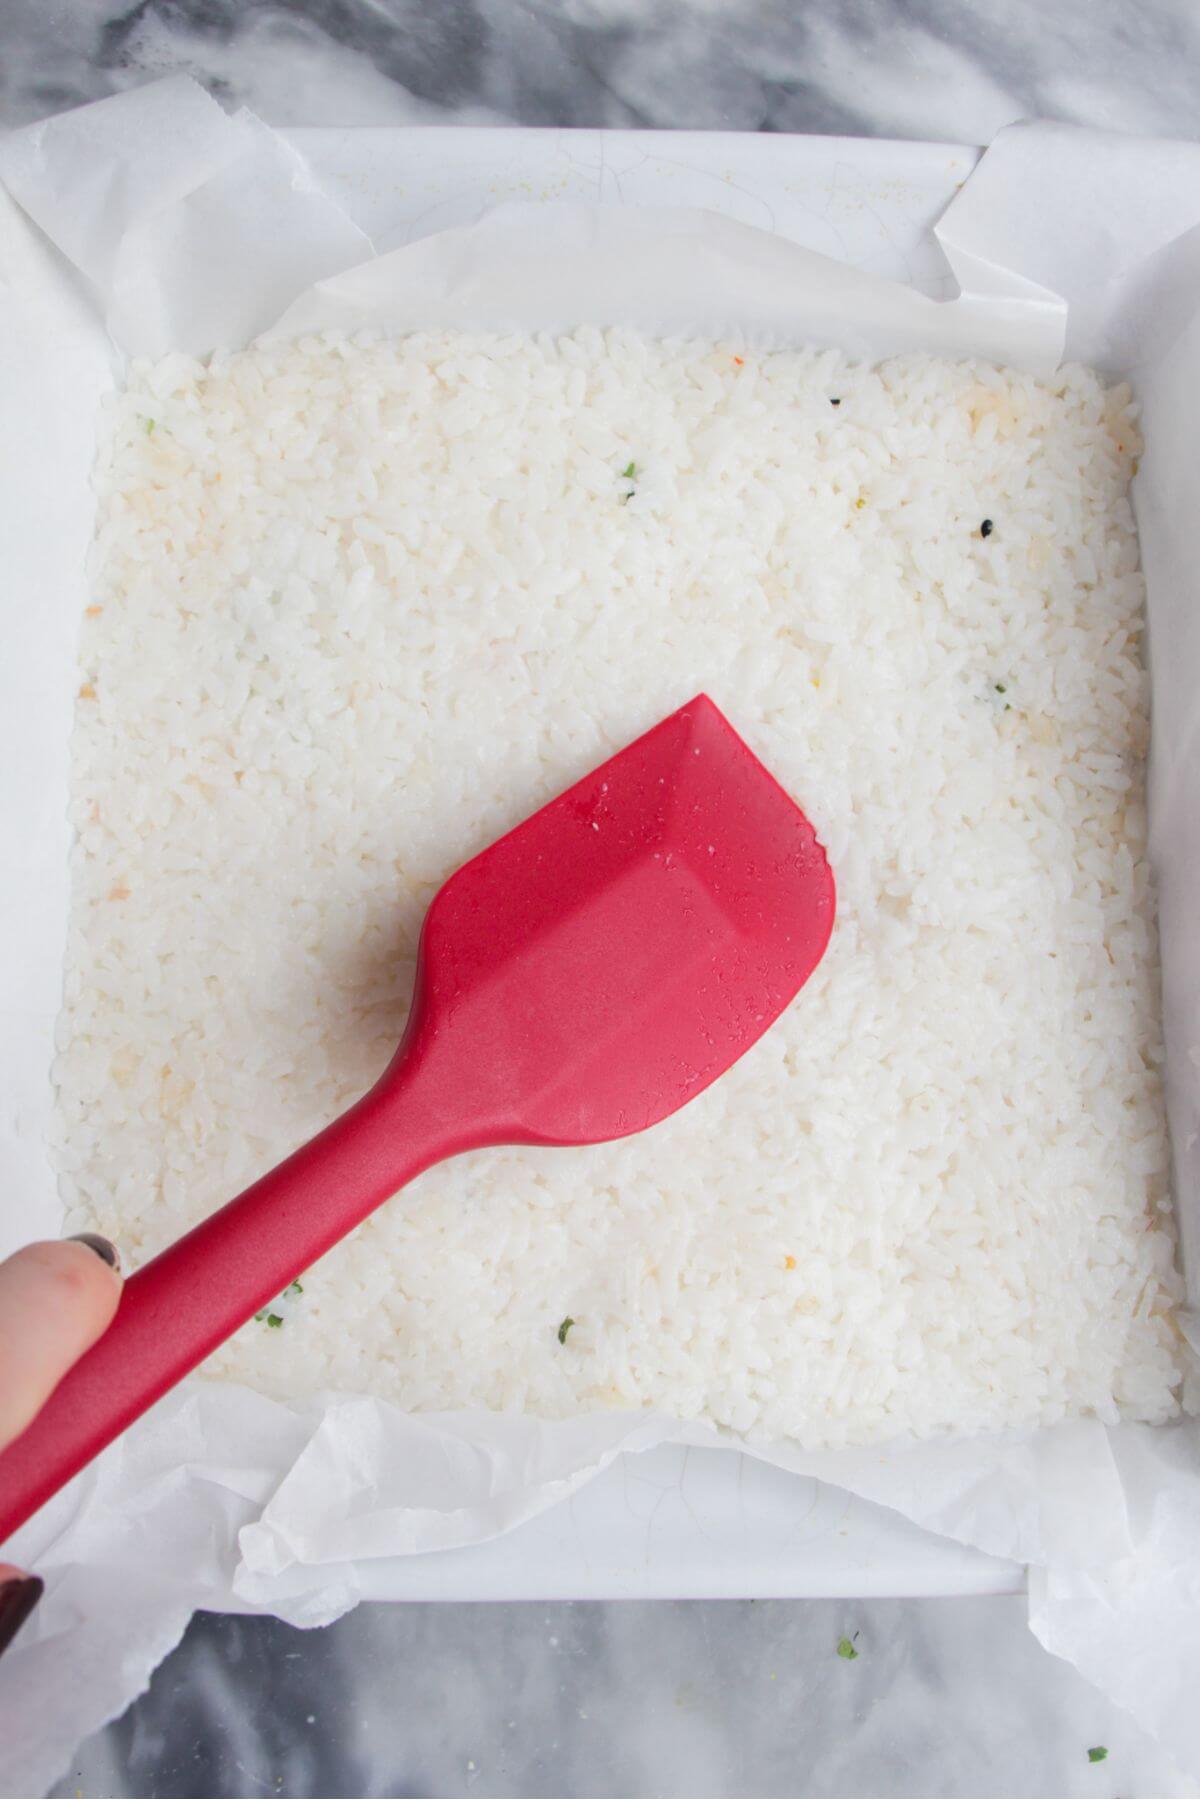 Red spatula smoothing rice into a square baking dish.